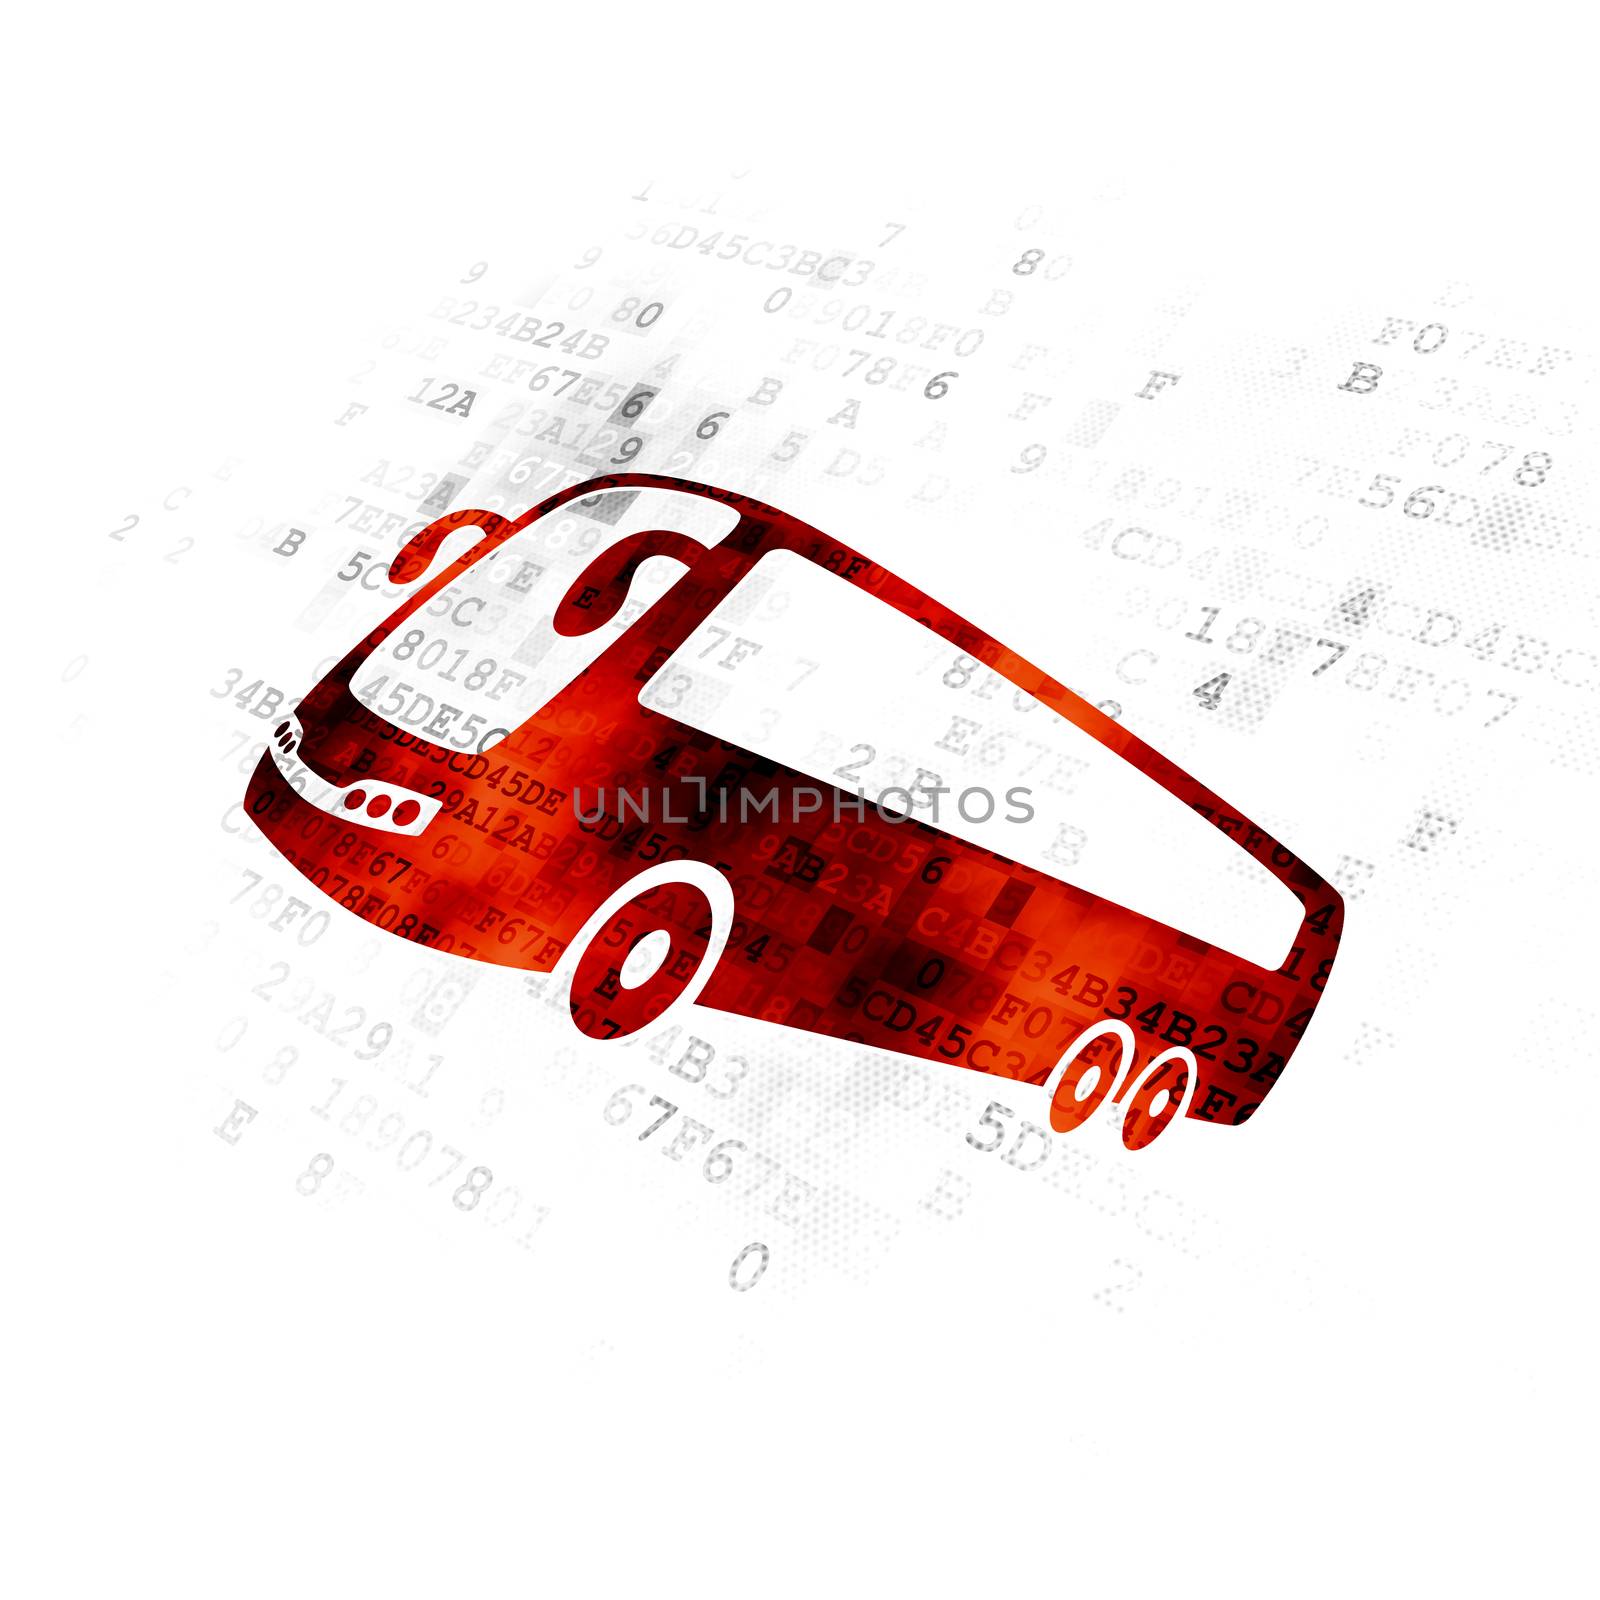 Travel concept: Pixelated red Bus icon on Digital background